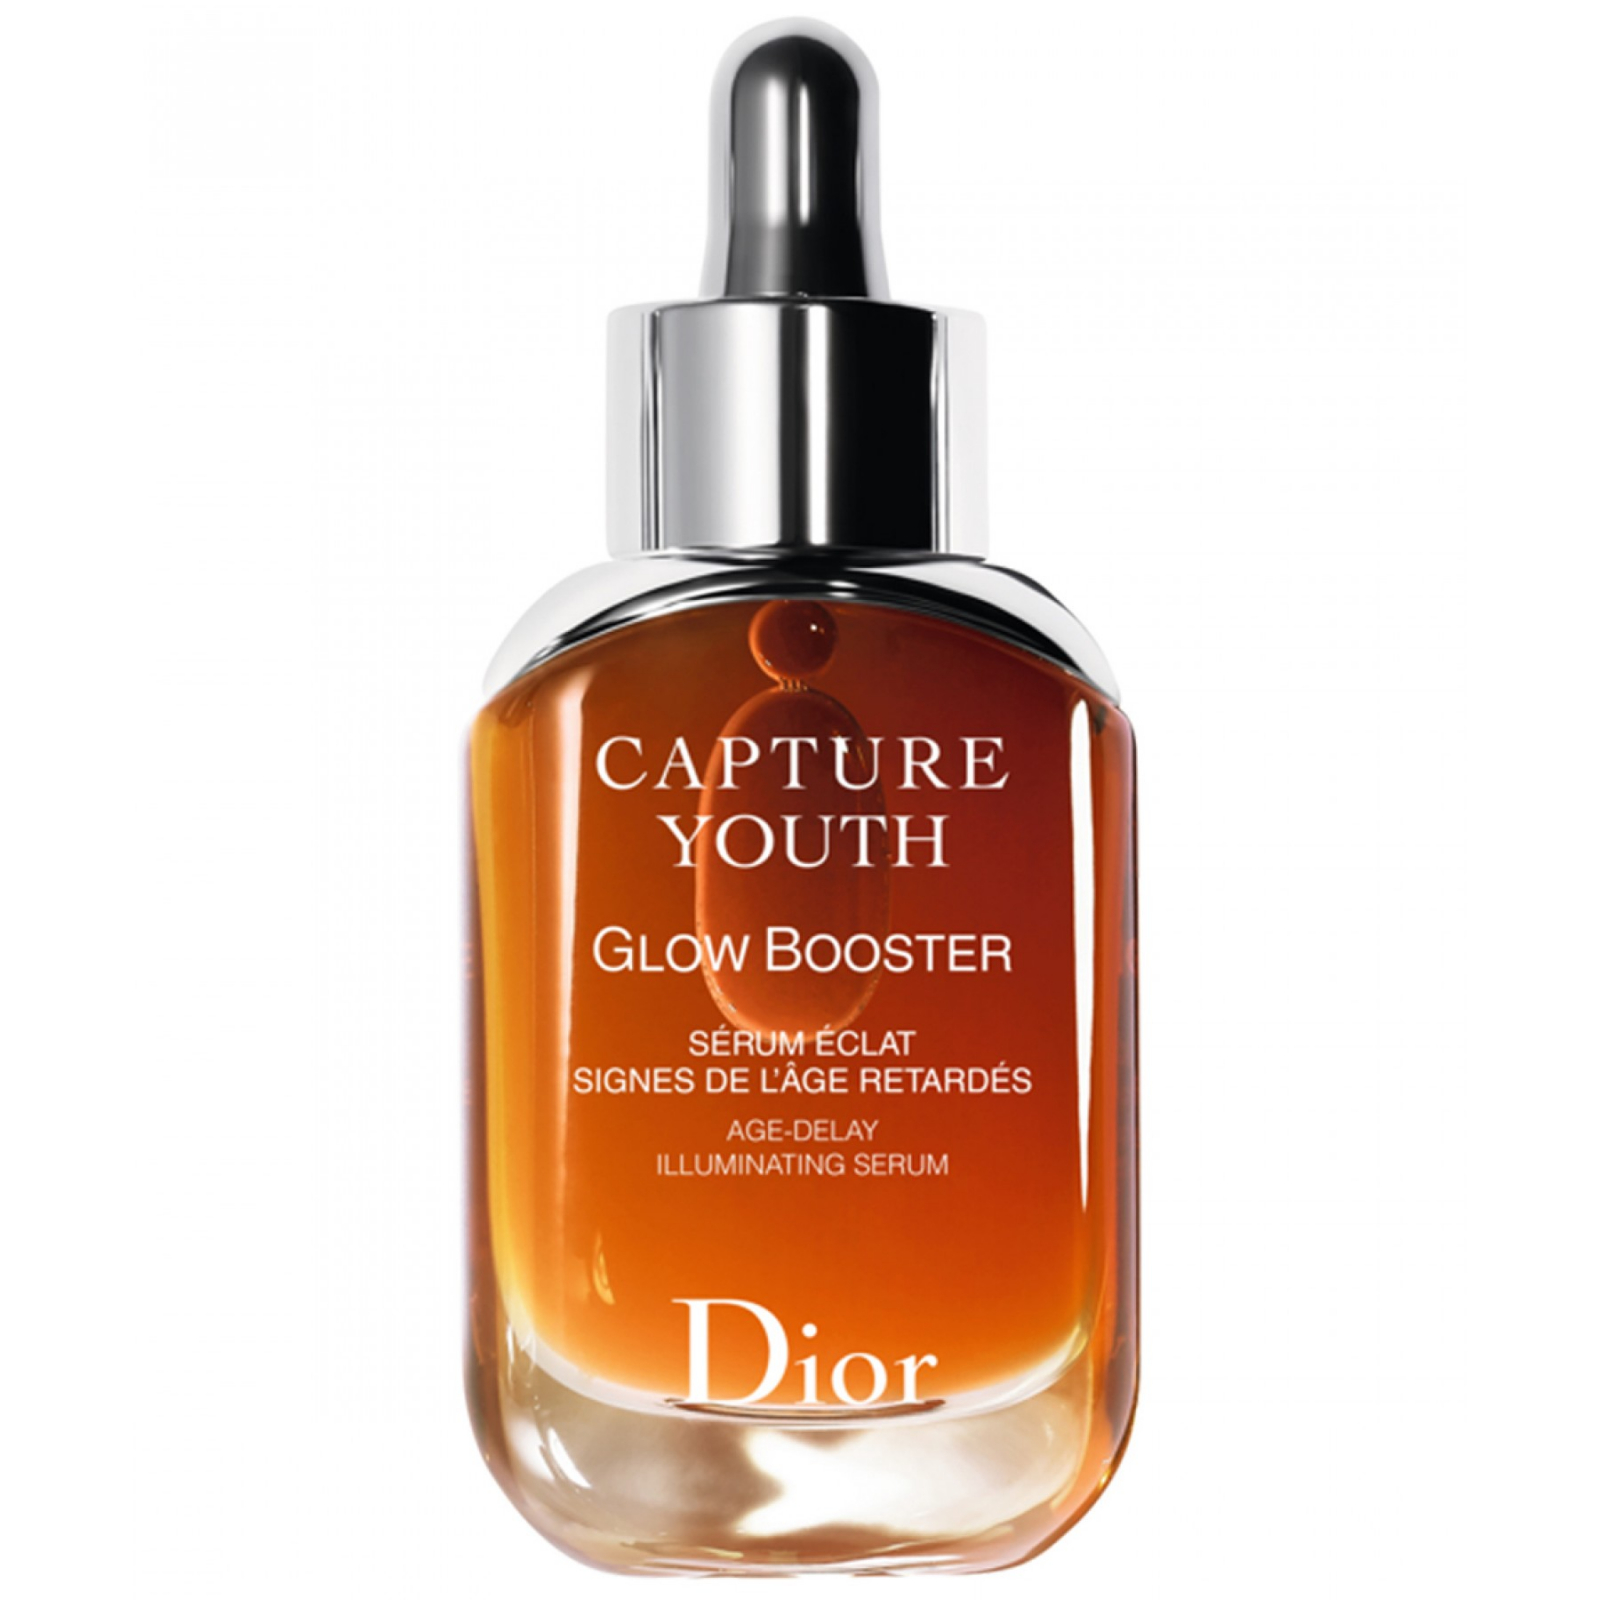 Dior Capture Youth Glow Booster, 449 zł